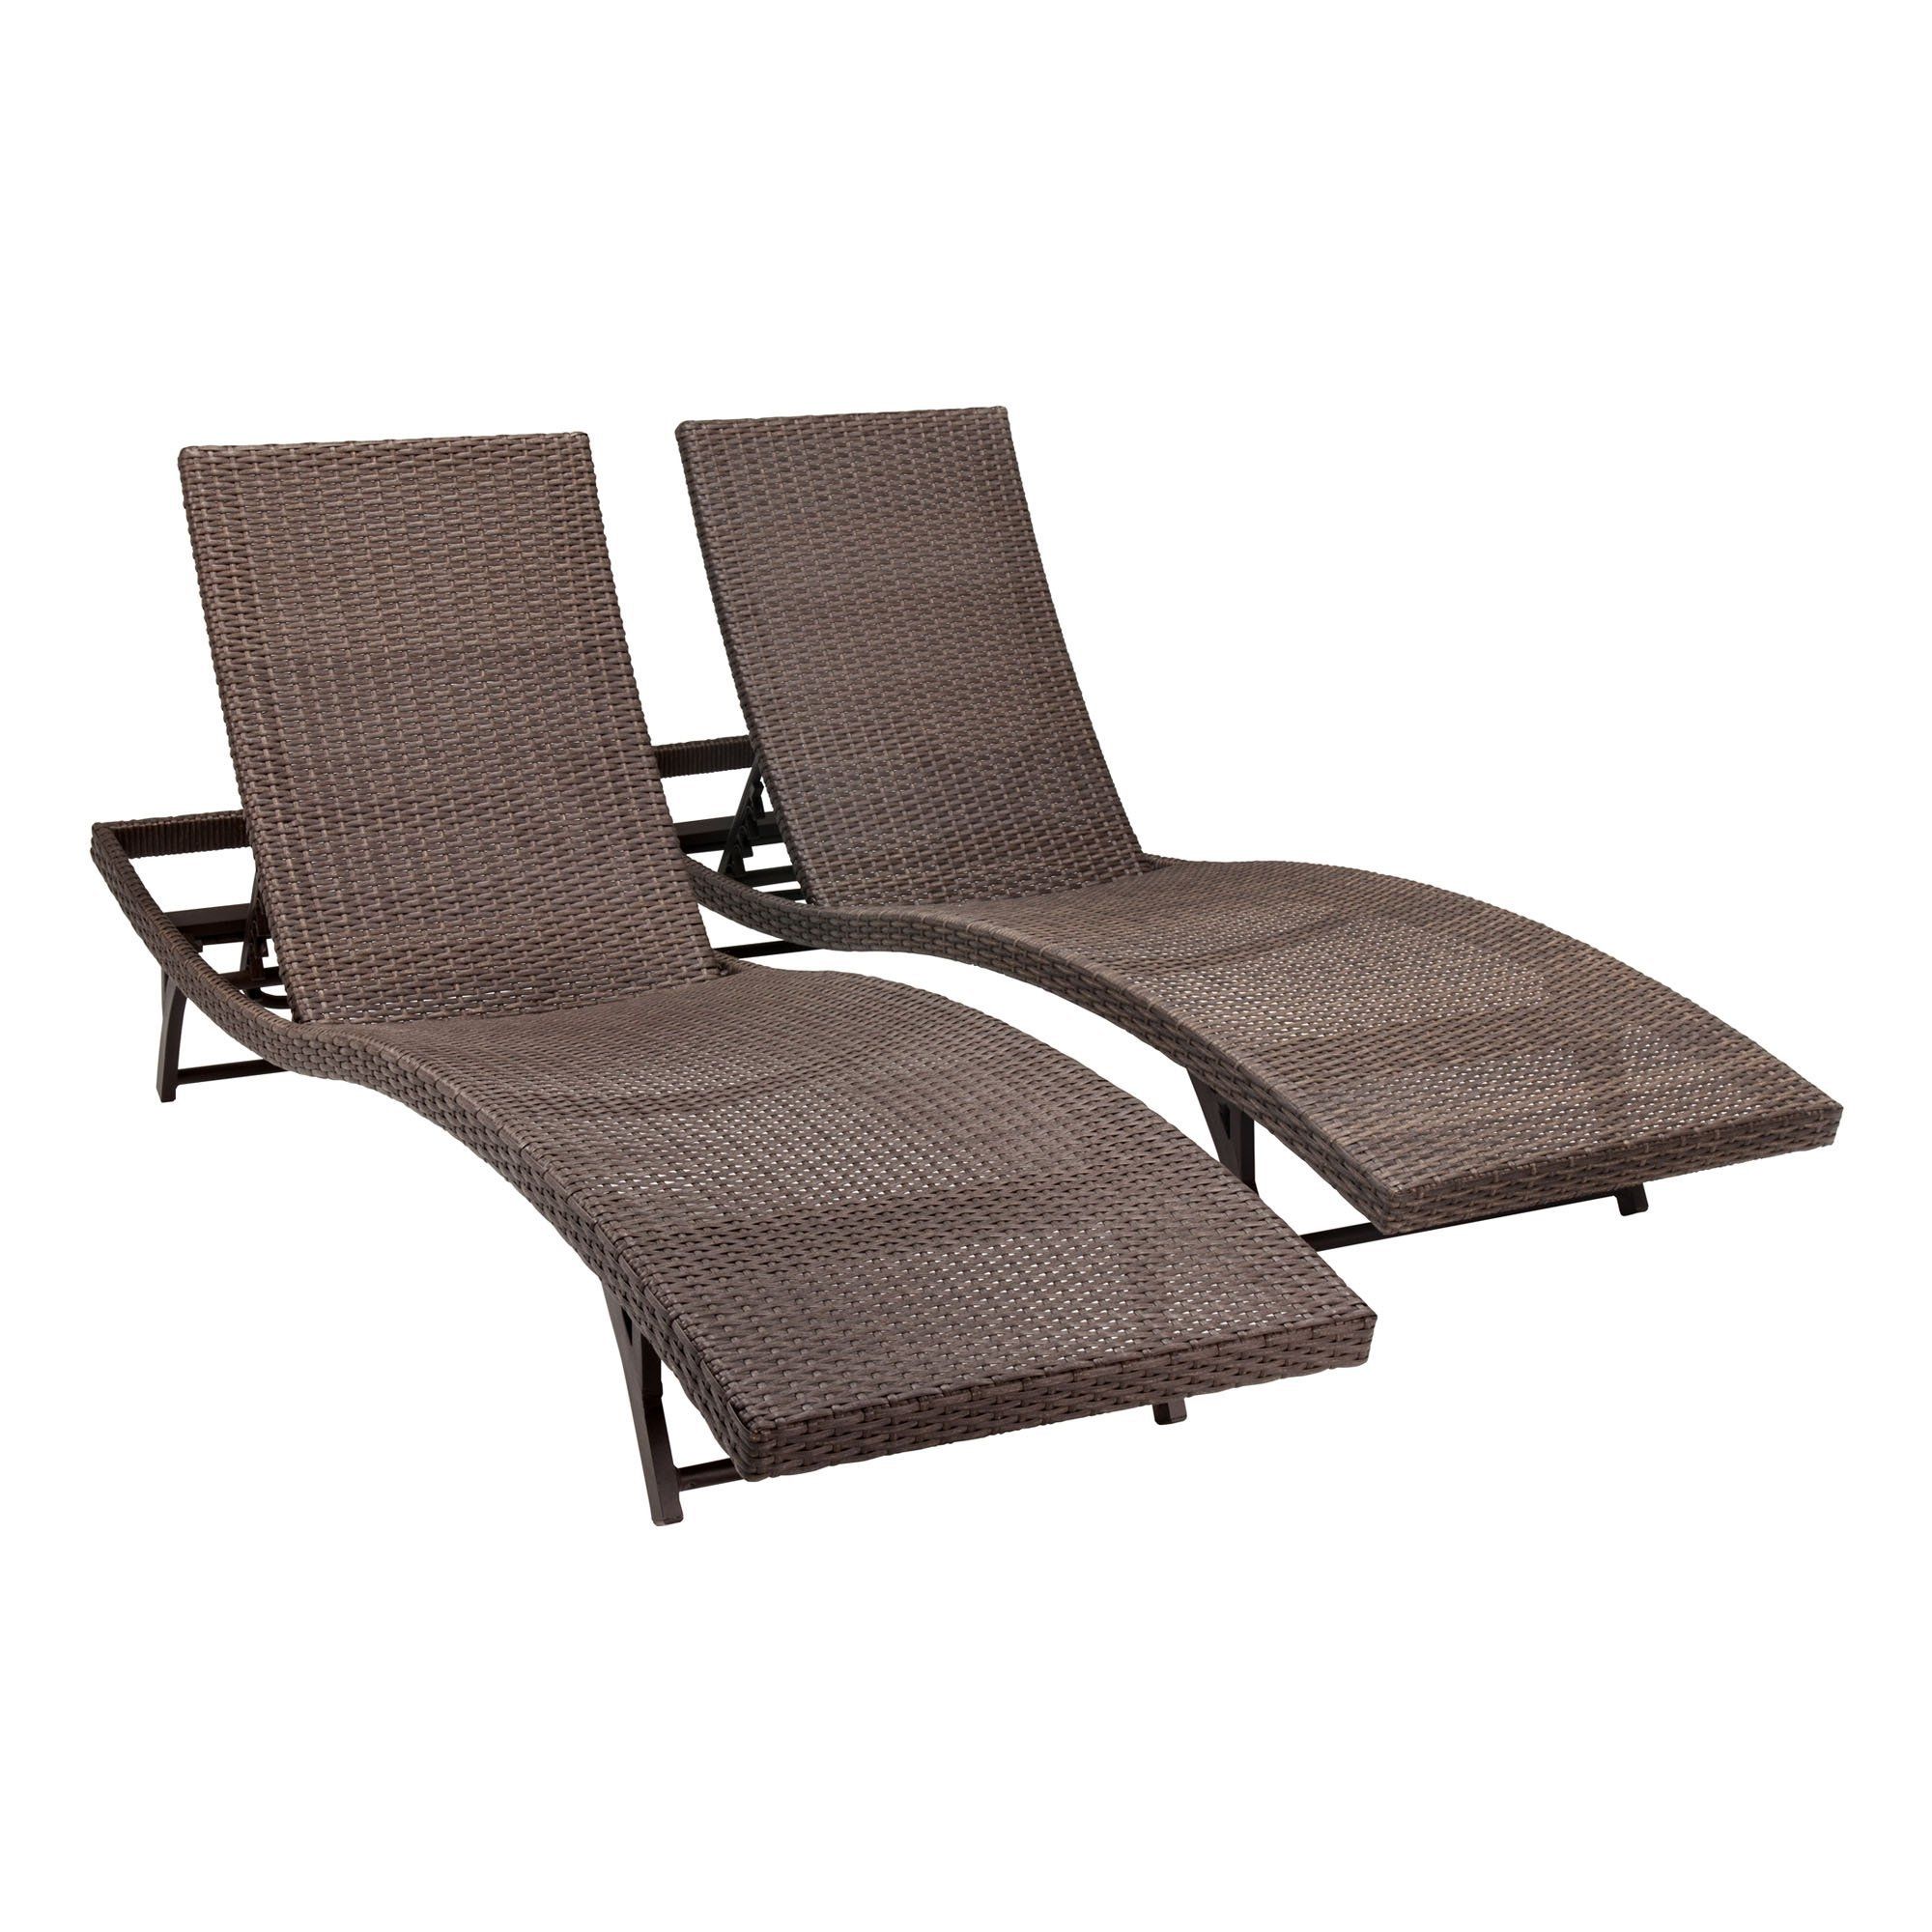 Famous Outdoor Chaise Lounge Chairs Ideas : Best Outdoor Chaise Lounge Regarding Aluminum Chaise Lounge Chairs (View 13 of 15)